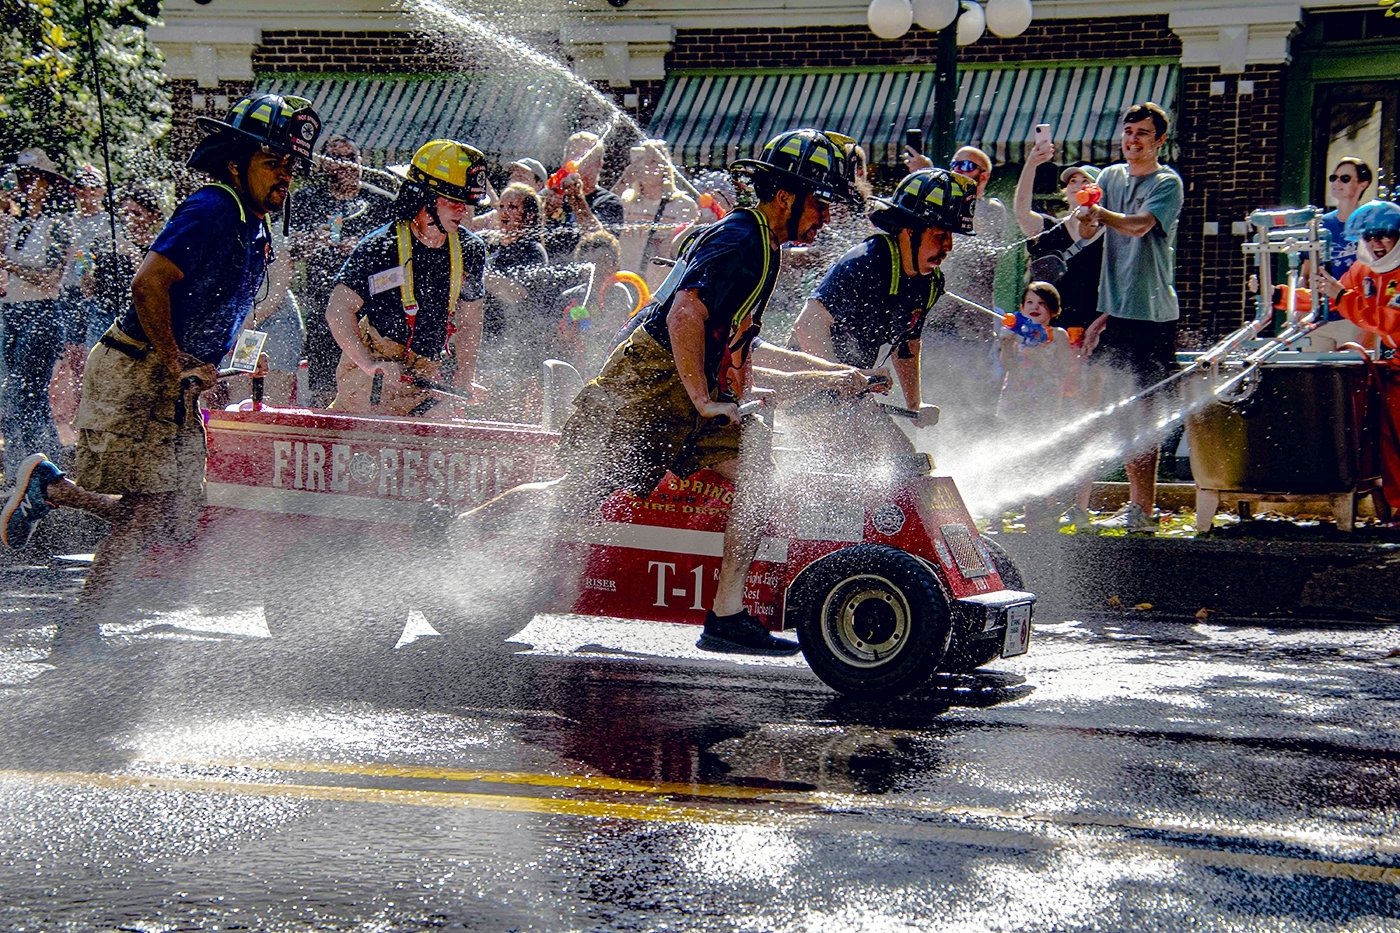 Tub Races in Spa City, Suzy Upton, National Park Photography Club, 1 HM